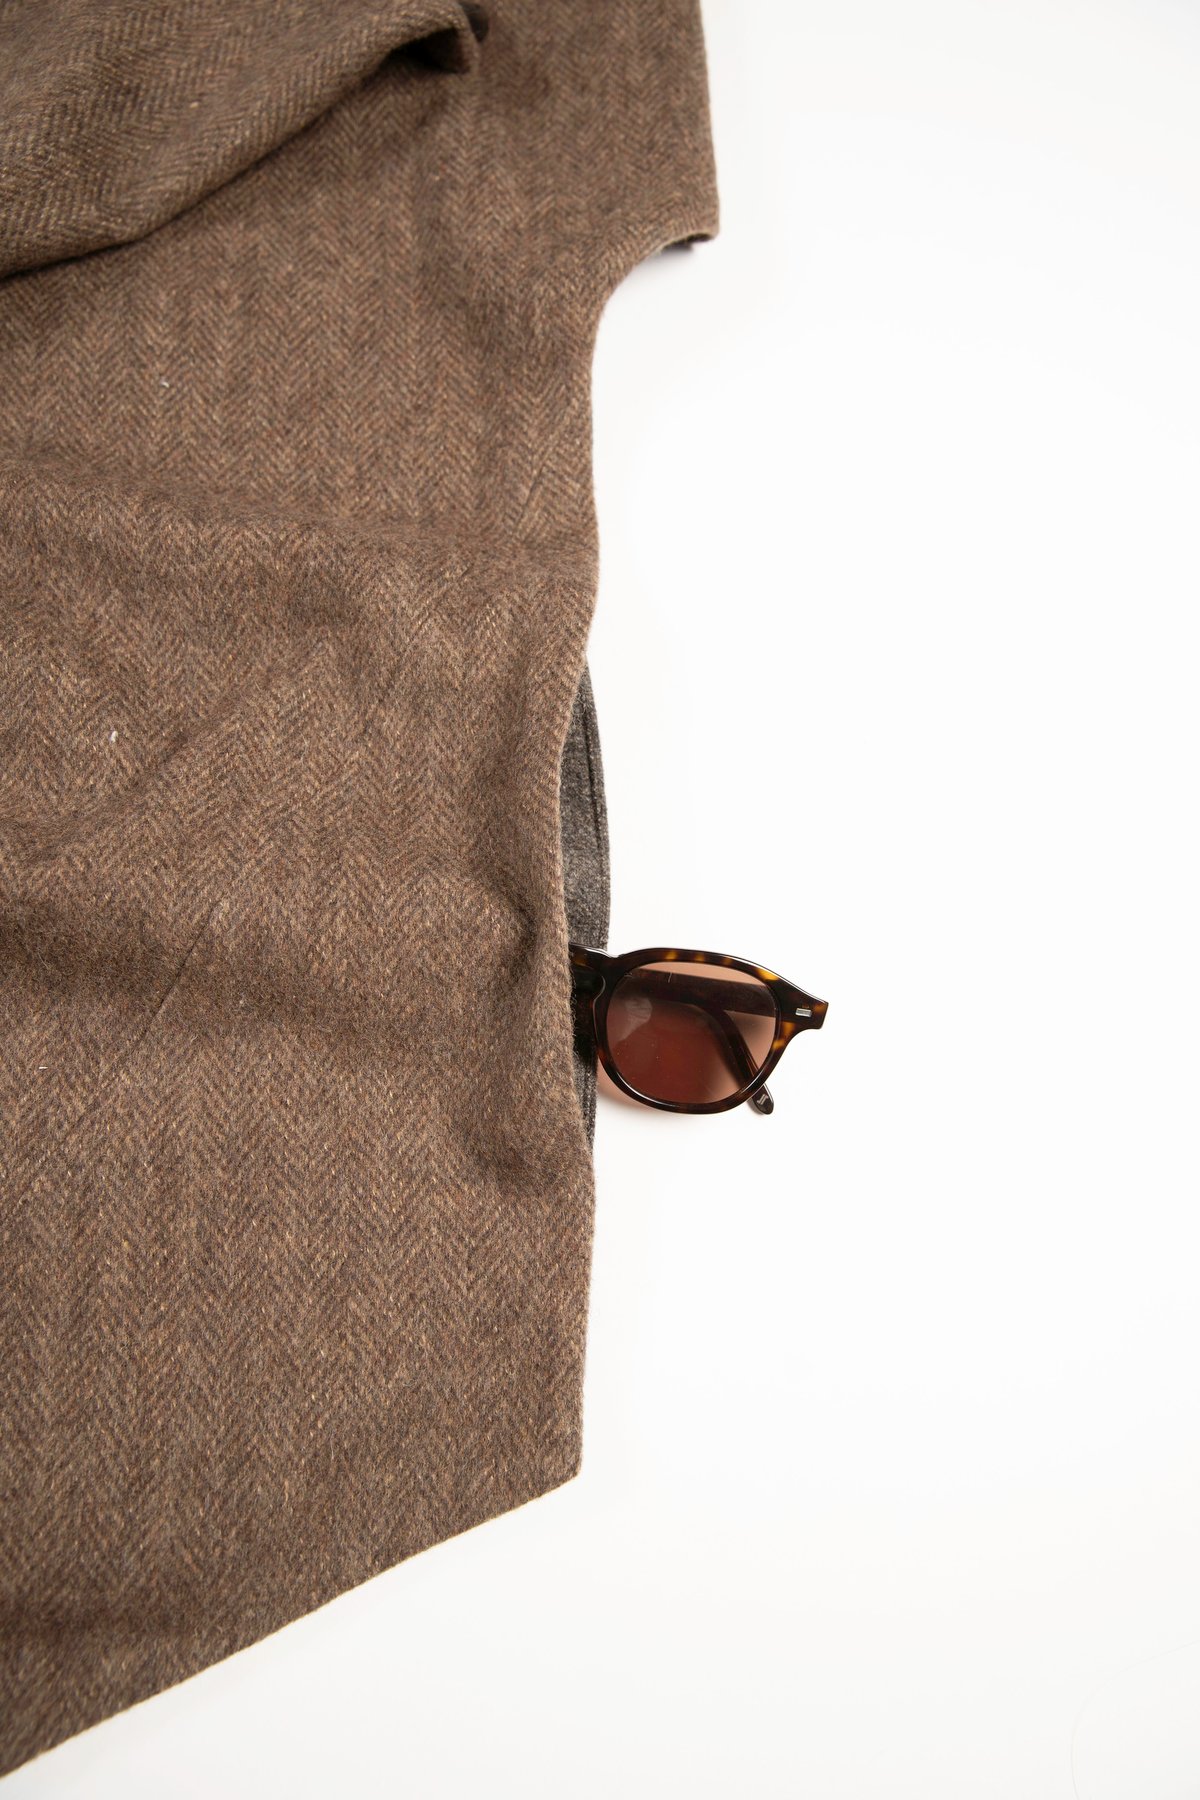 Image of T-Crux 28.5" With Cashmere Lining